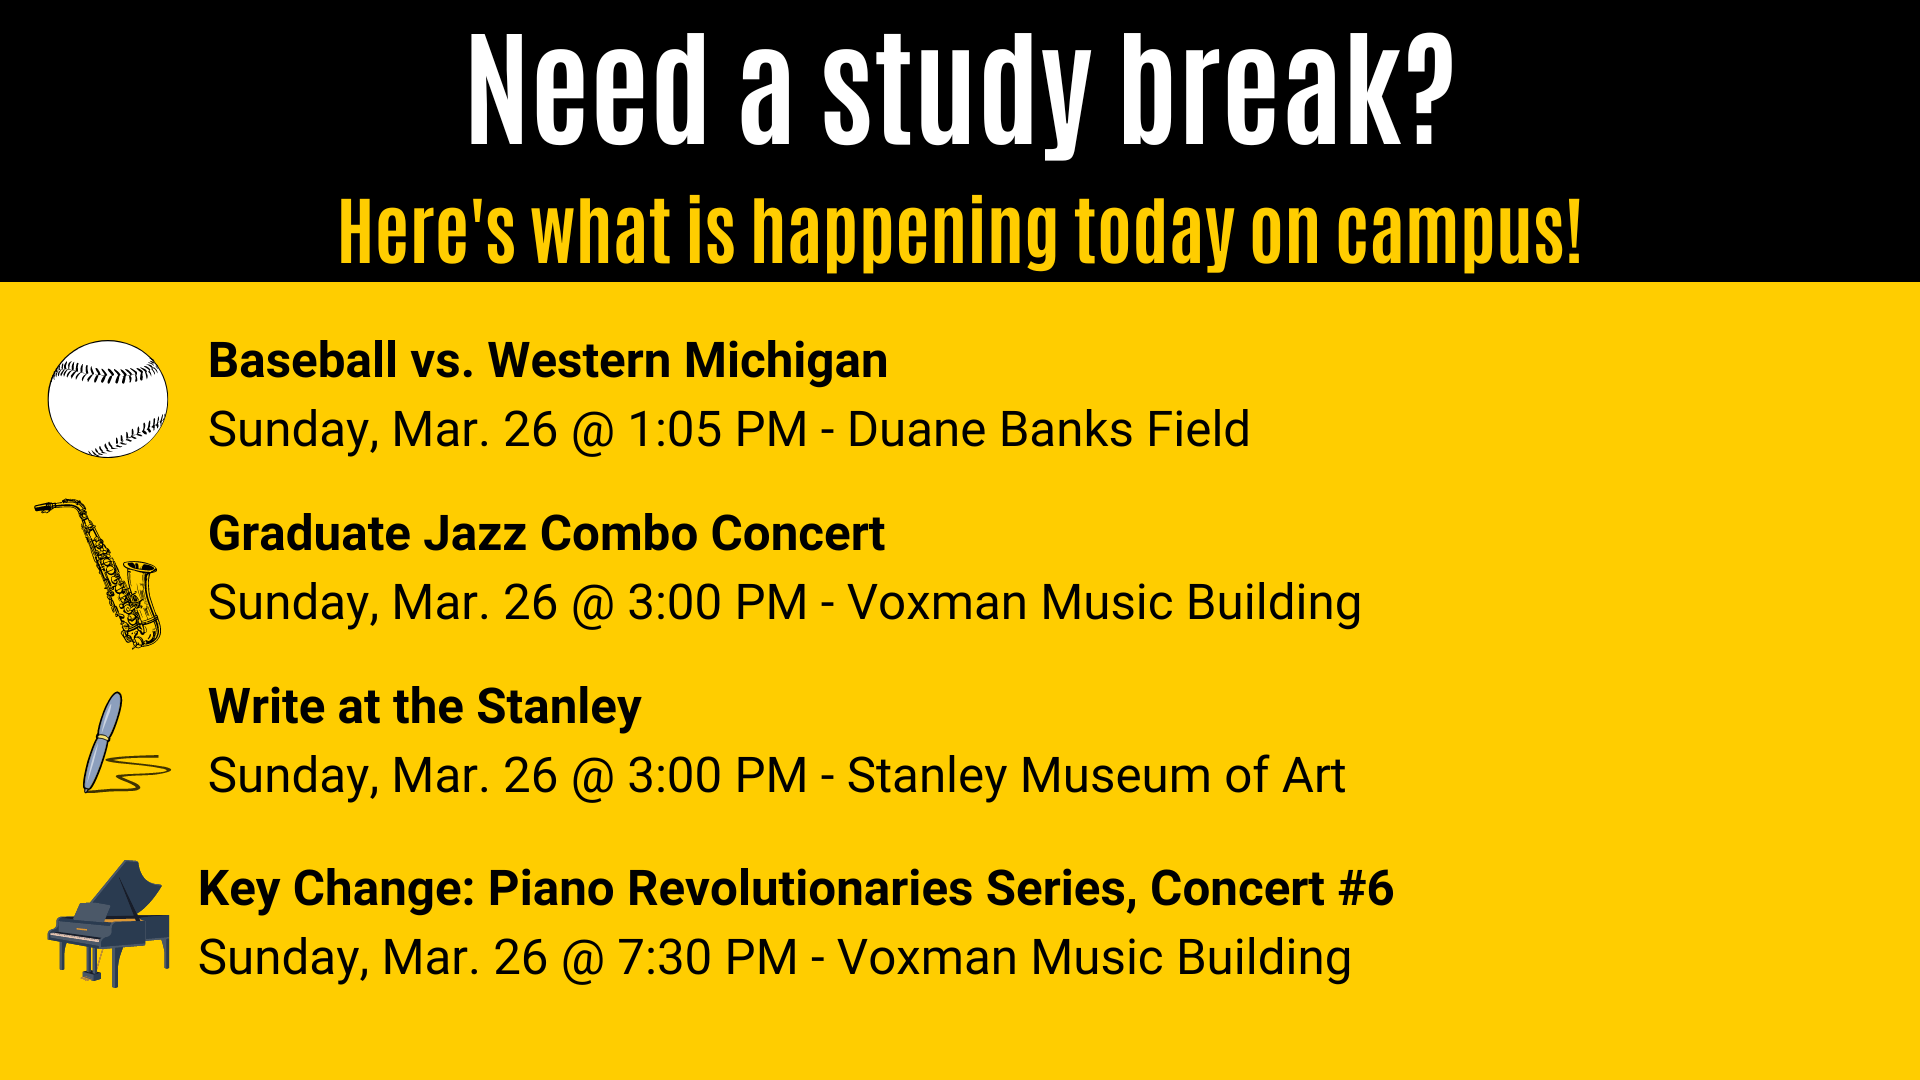 Graduate Jazz Combo Concert  Sunday, Mar. 26 @ 3:00 PM - Voxman Music Building Baseball vs. Western Michigan Sunday, Mar. 26 @ 1:05 PM - Duane Banks Field Need a study break? Here's what is happening today on campus! Write at the Stanley  Sunday, Mar. 26 @ 3:00 PM - Stanley Museum of Art Key Change: Piano Revolutionaries Series, Concert #6 Sunday, Mar. 26 @ 7:30 PM - Voxman Music Building